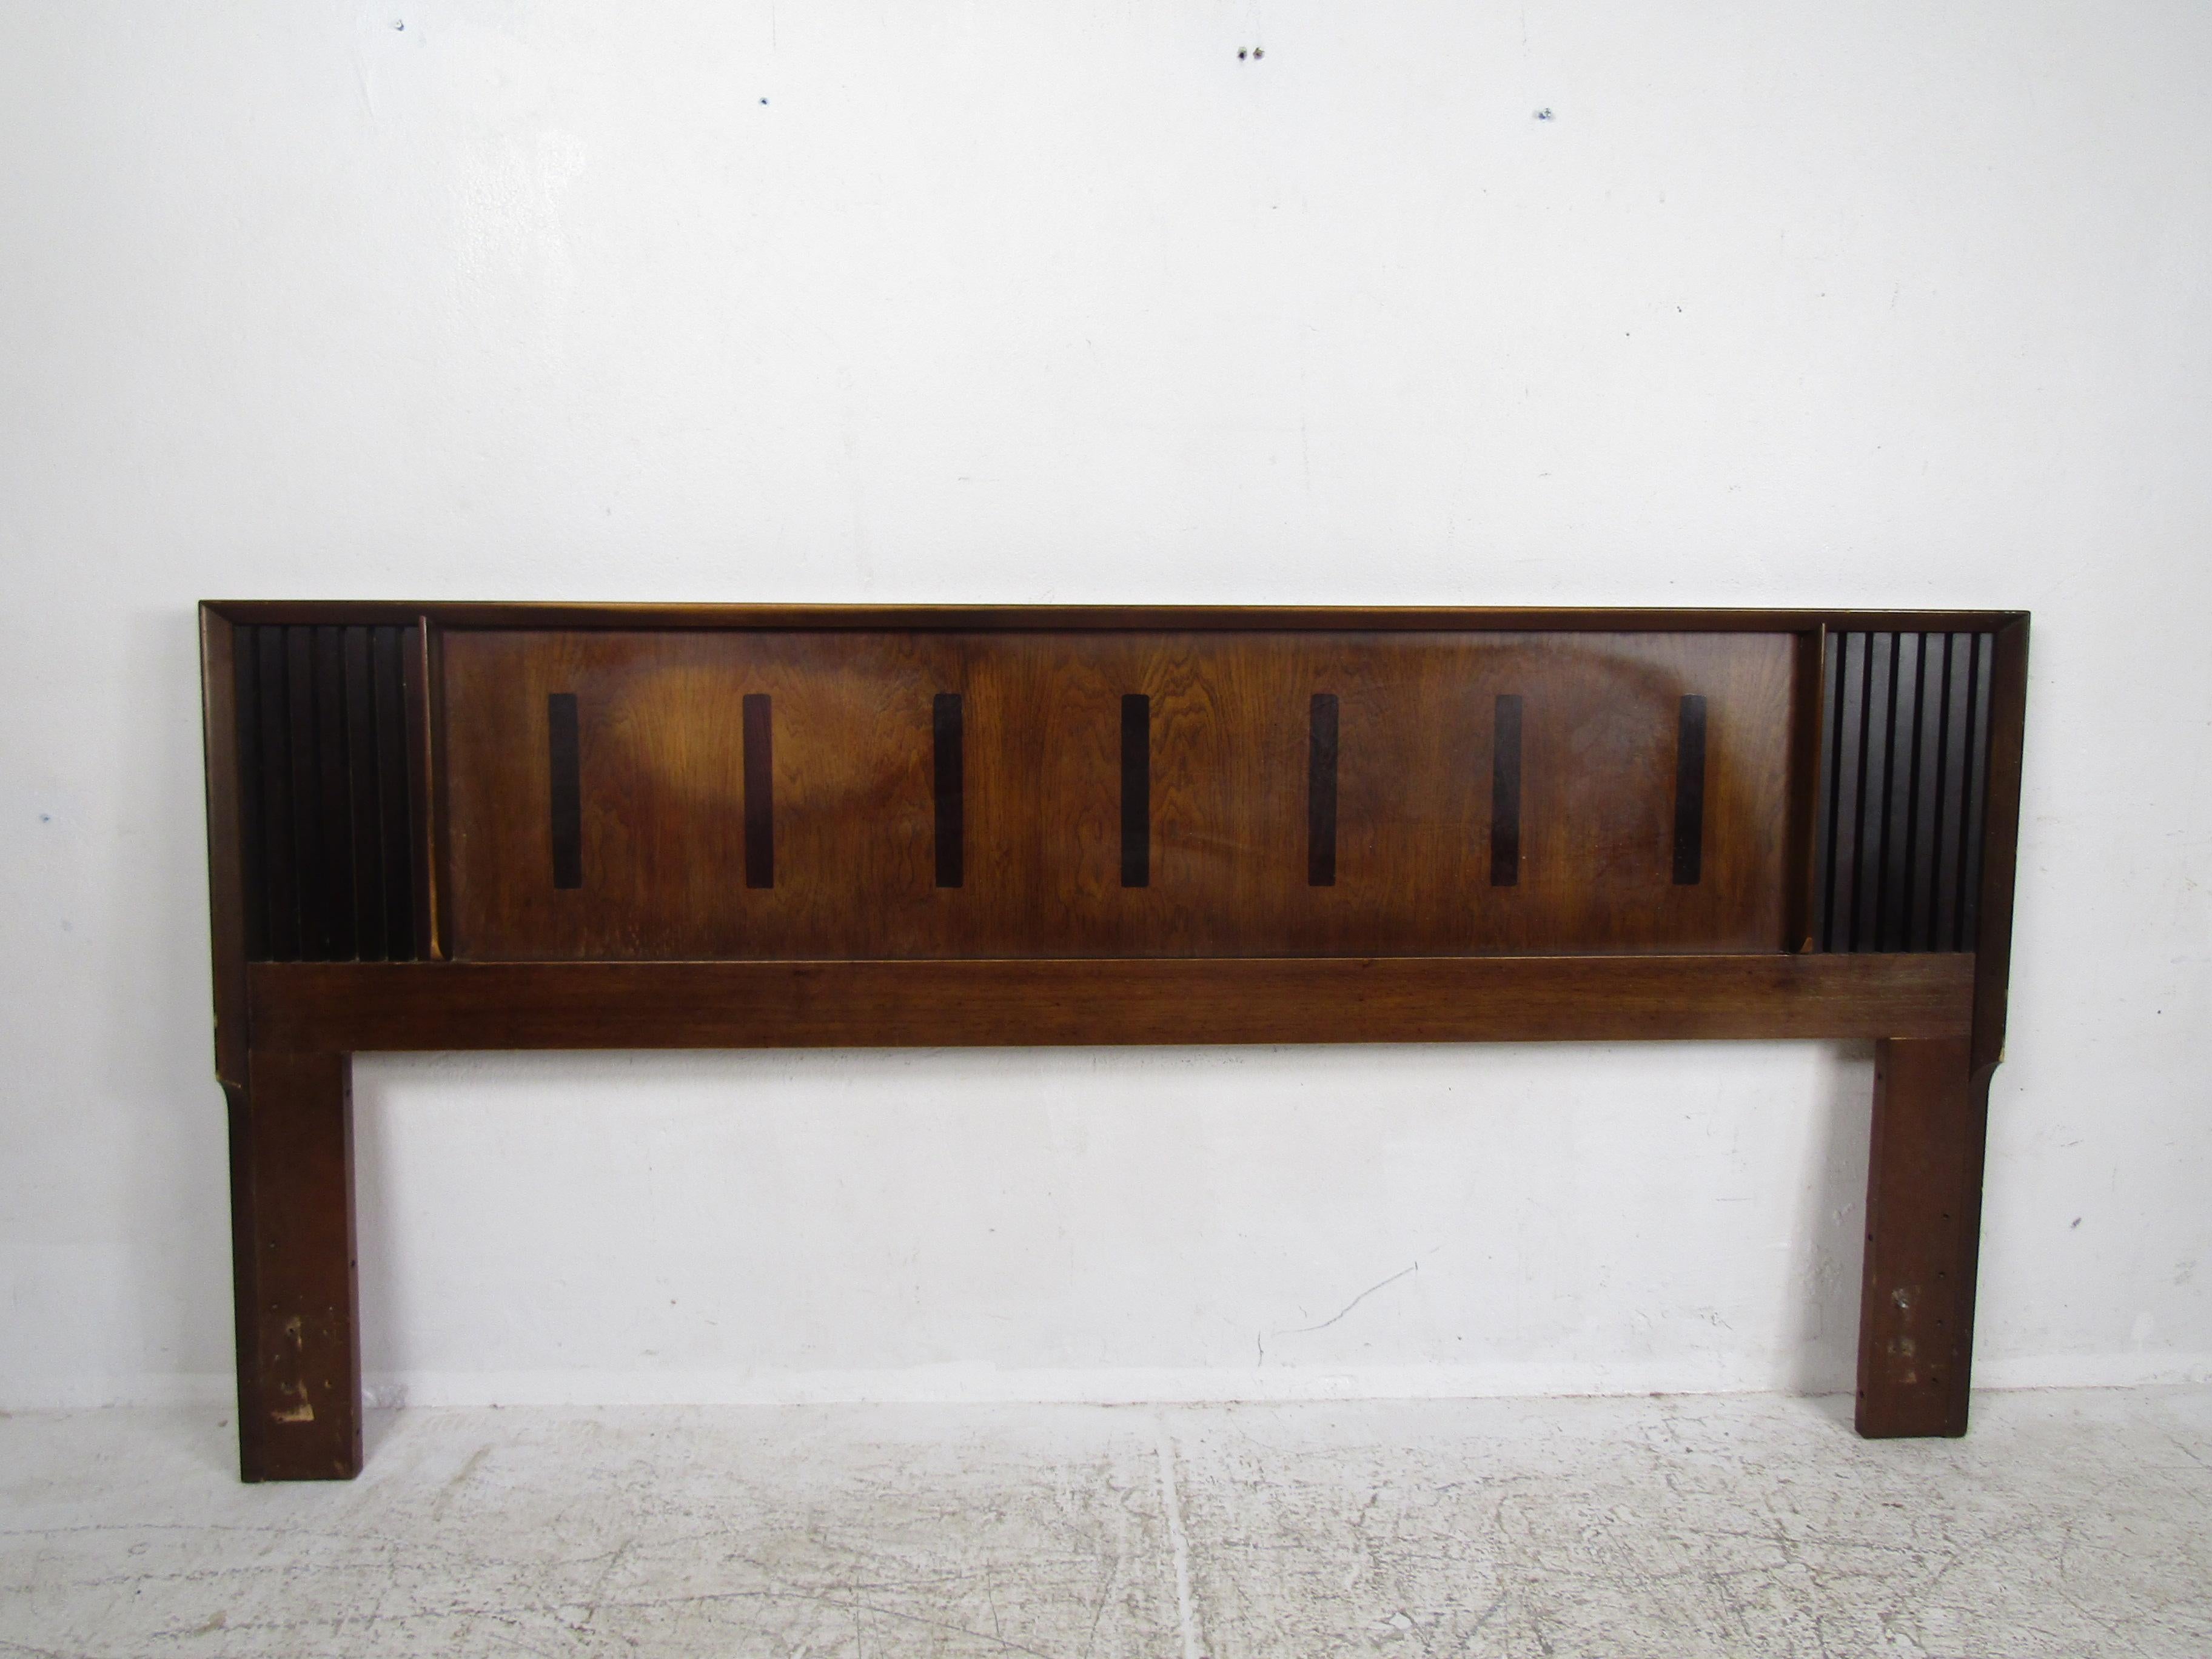 This beautiful vintage modern two-tone headboard is made of walnut and rosewood. An impressive king size headboard that is 81 inches wide with vertical louvered designs on the sides. Please confirm the item location (NY or NJ).